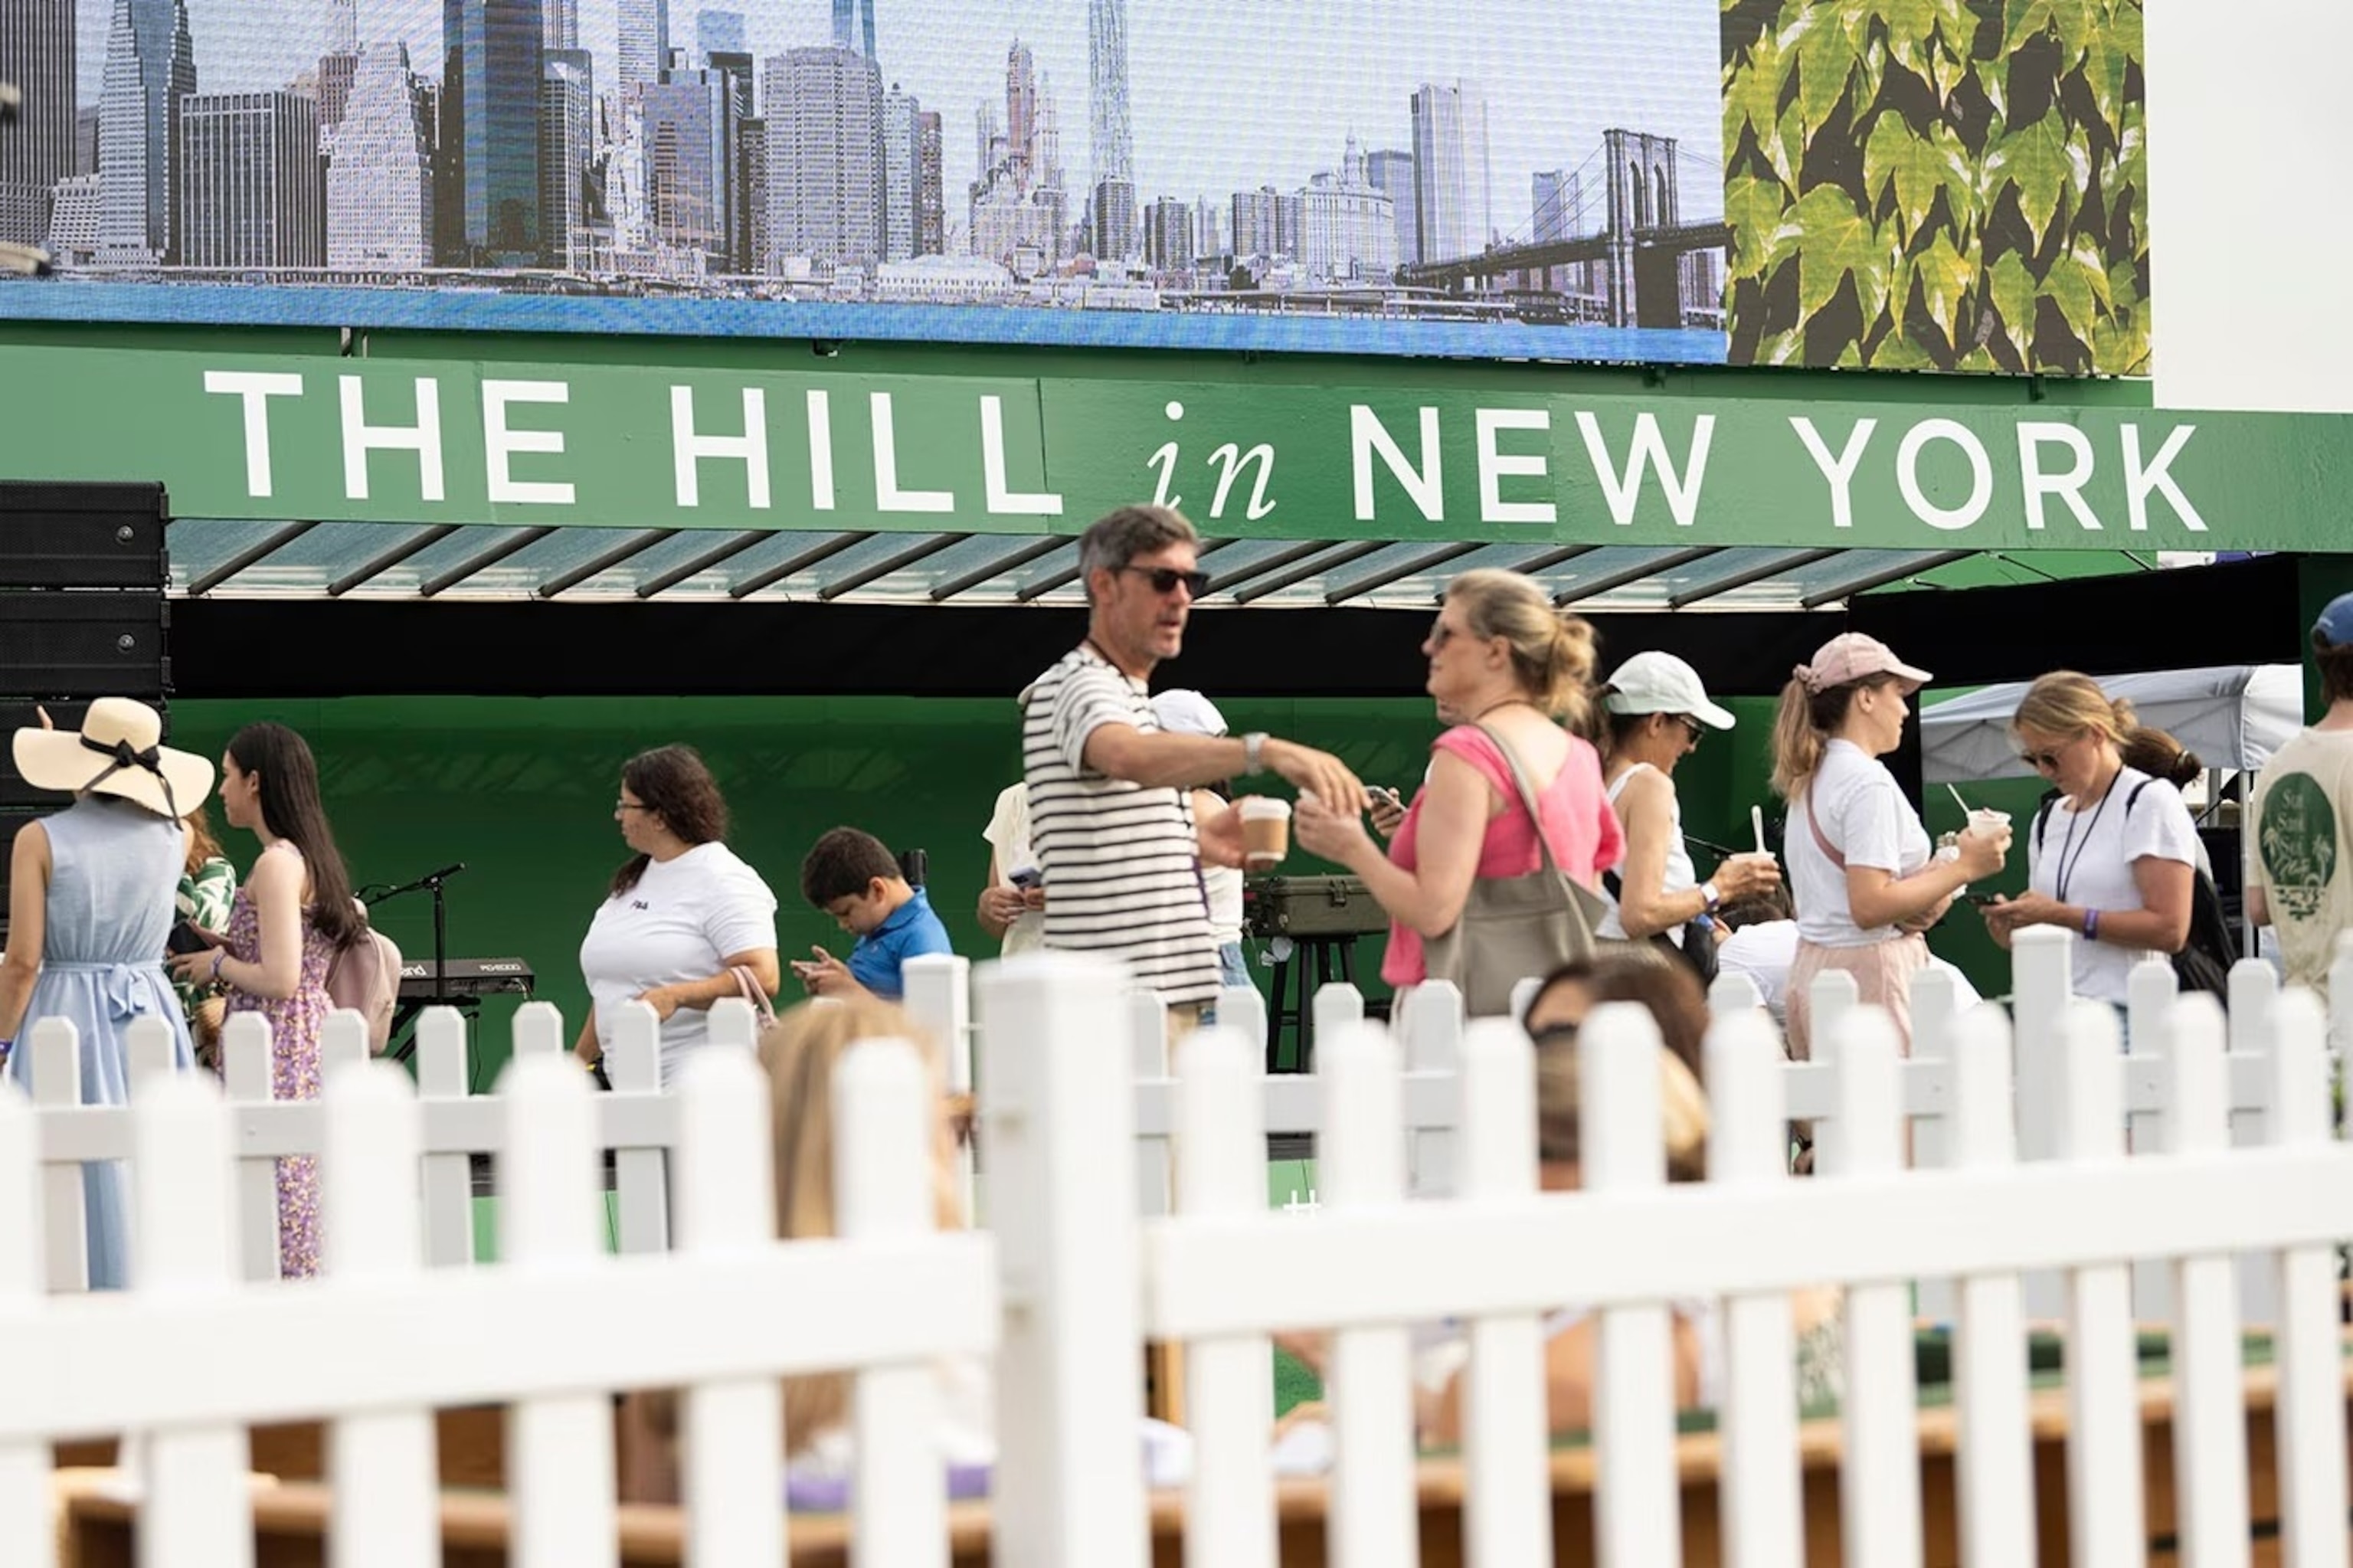 PHOTO: Fans gather across the pond in Brooklyn Bridge Park to experience a taste of Wimbledon at The Hill in New York.